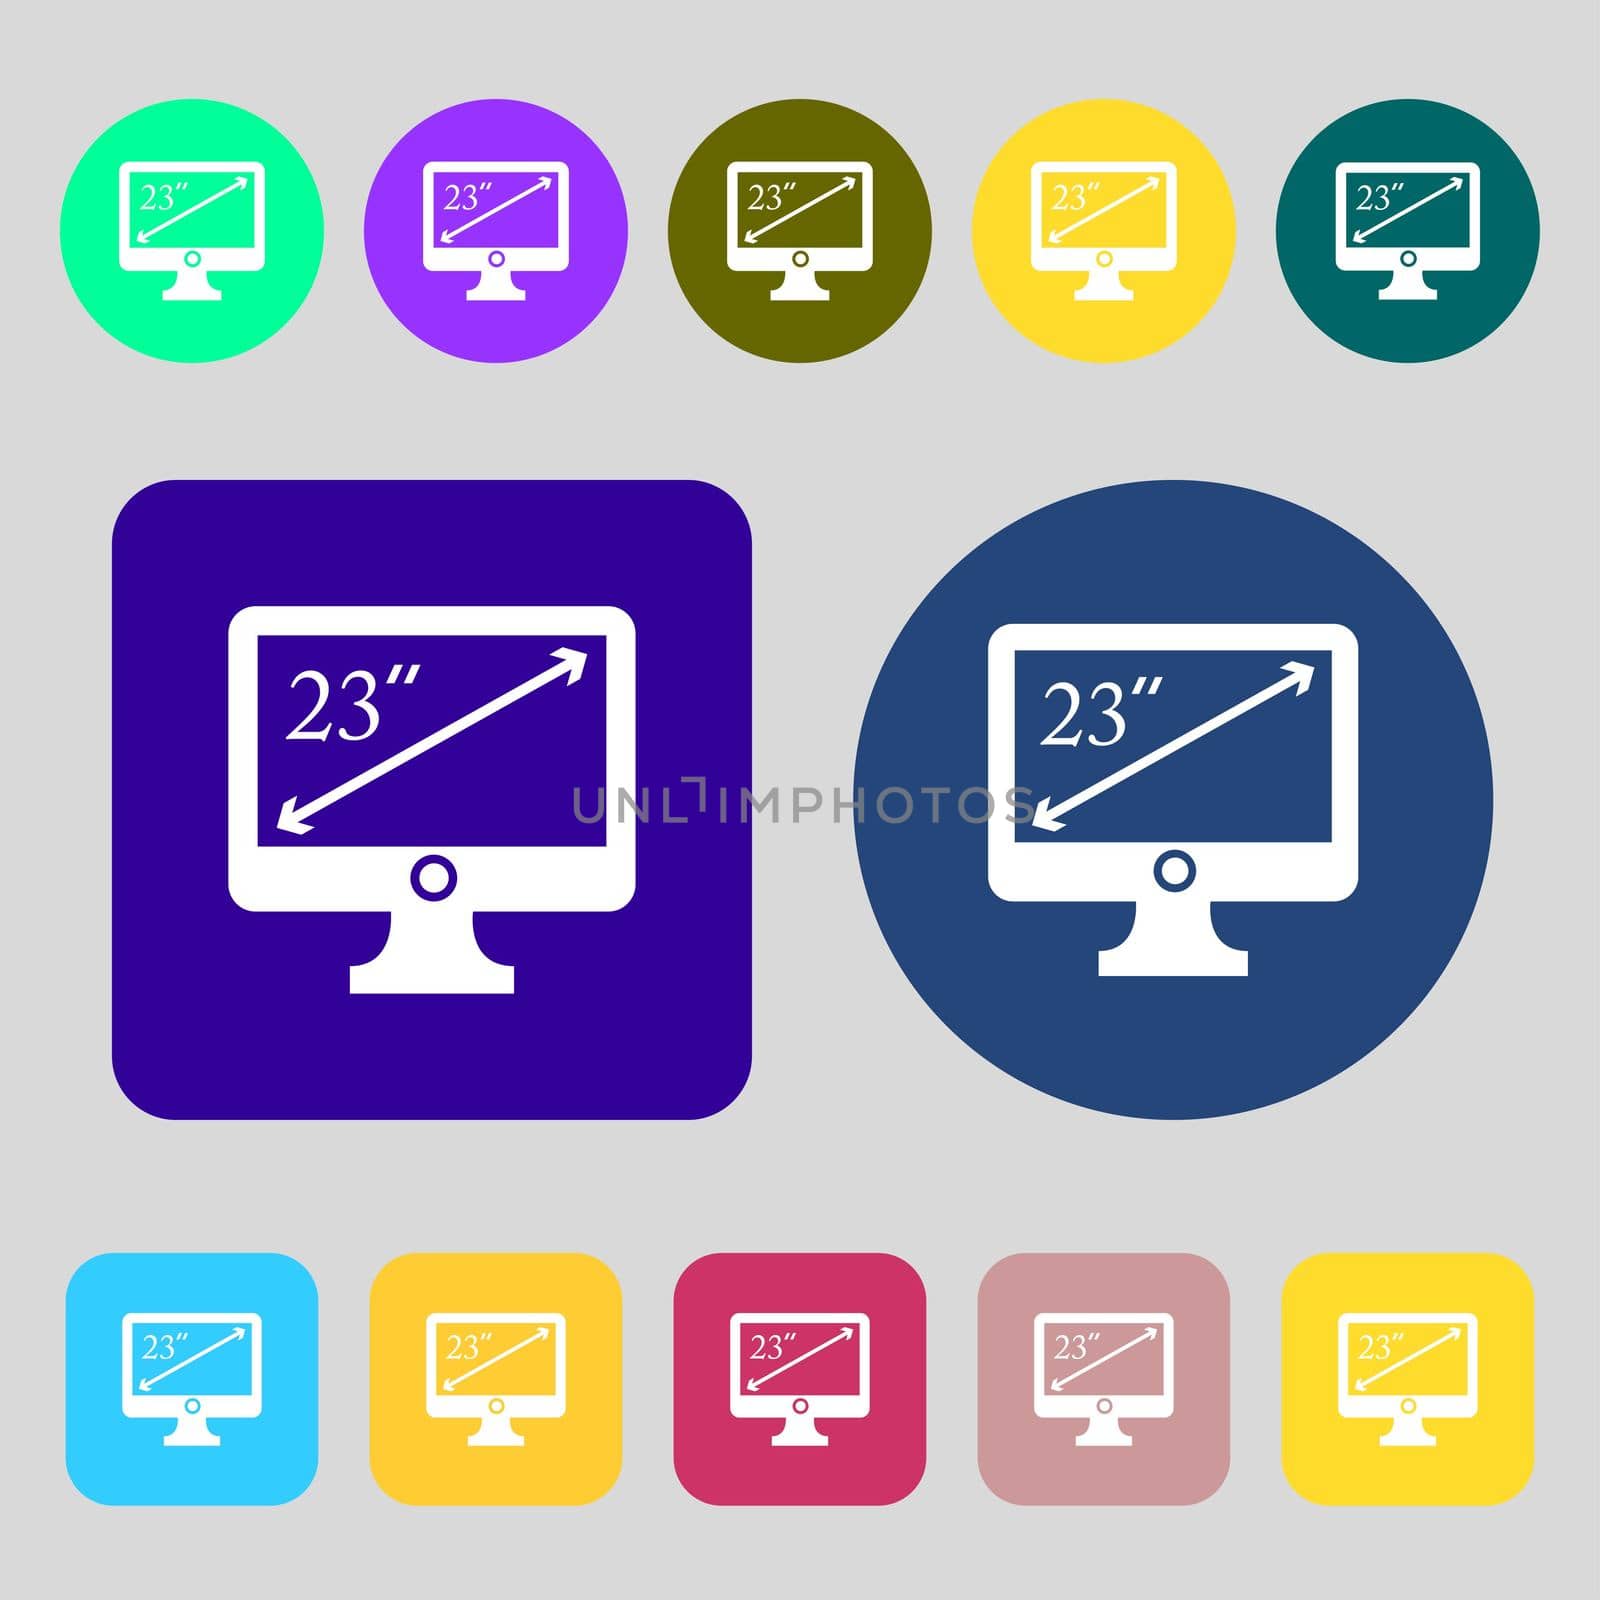 diagonal of the monitor 23 inches icon sign.12 colored buttons. Flat design. illustration